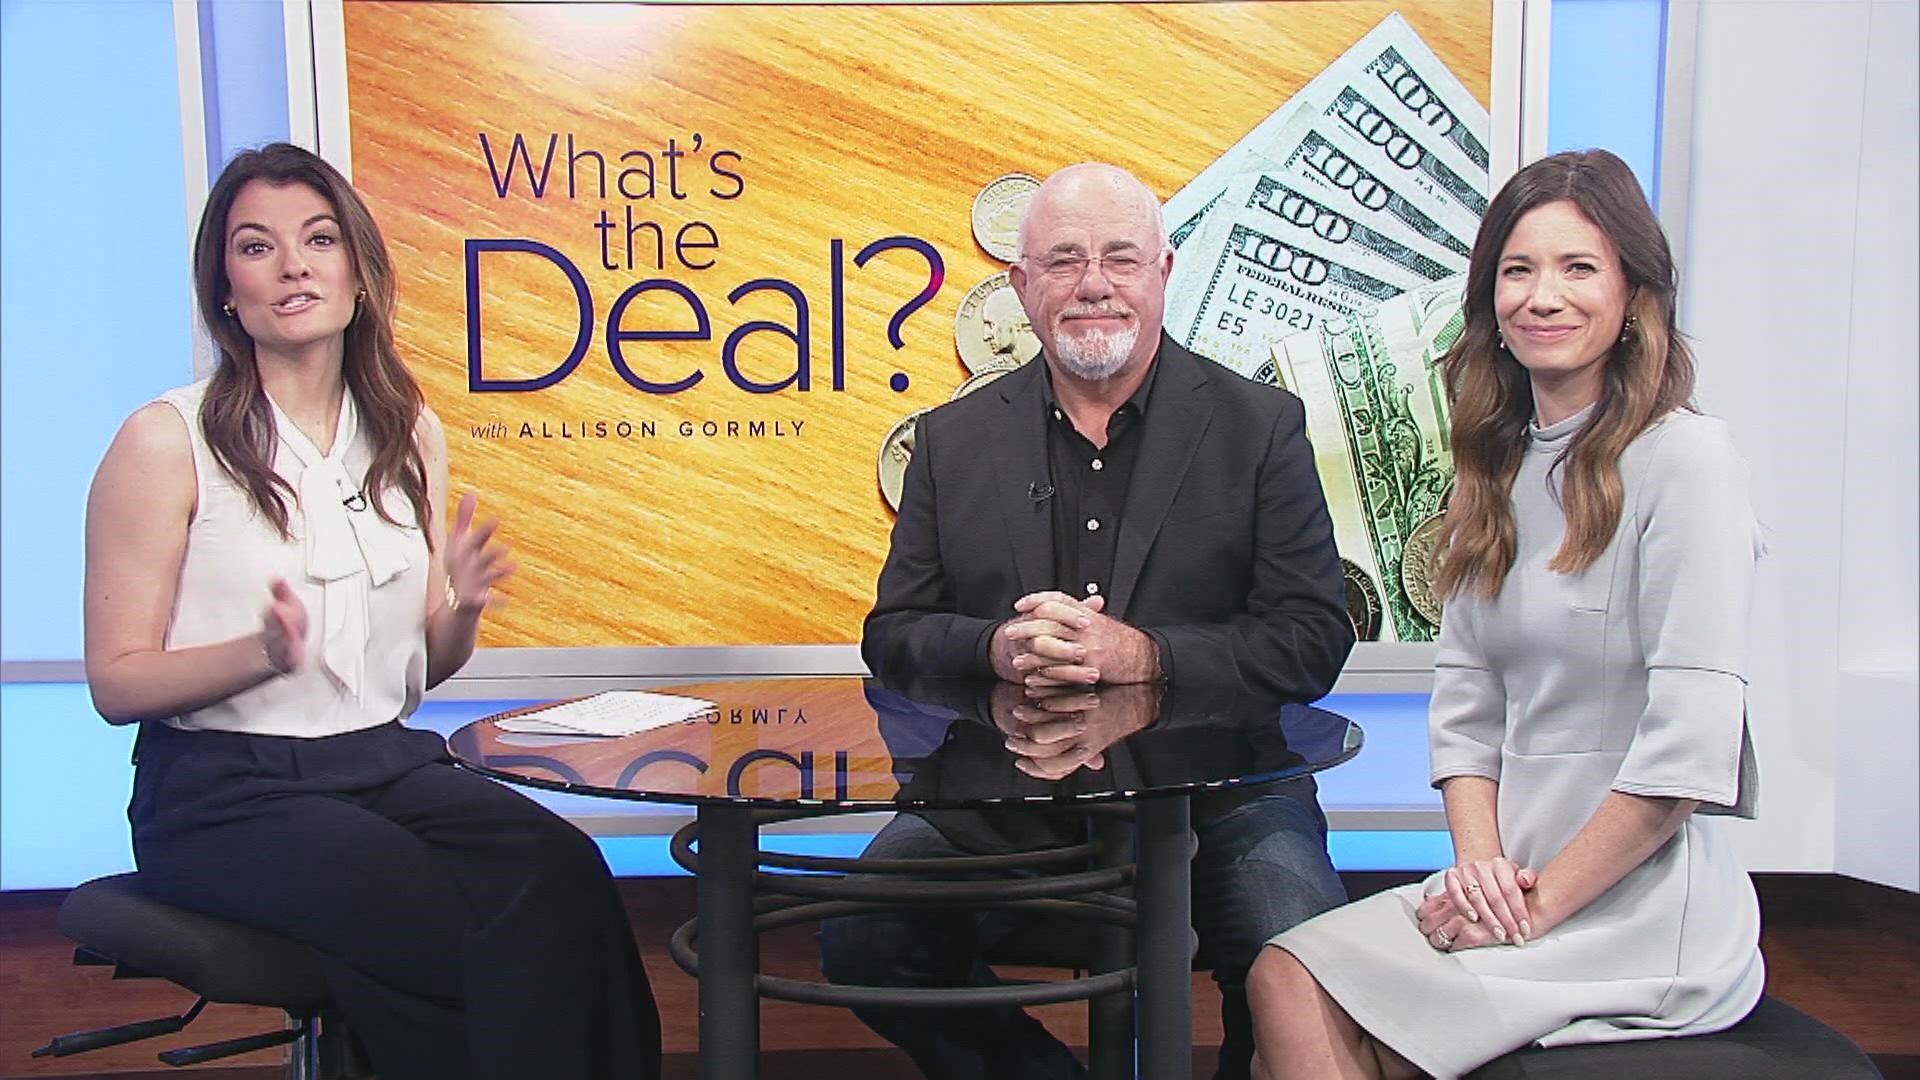 Financial experts Dave Ramsey and Rachel Cruze share insight on inflation in the U.S., budgeting and spending with a partner.